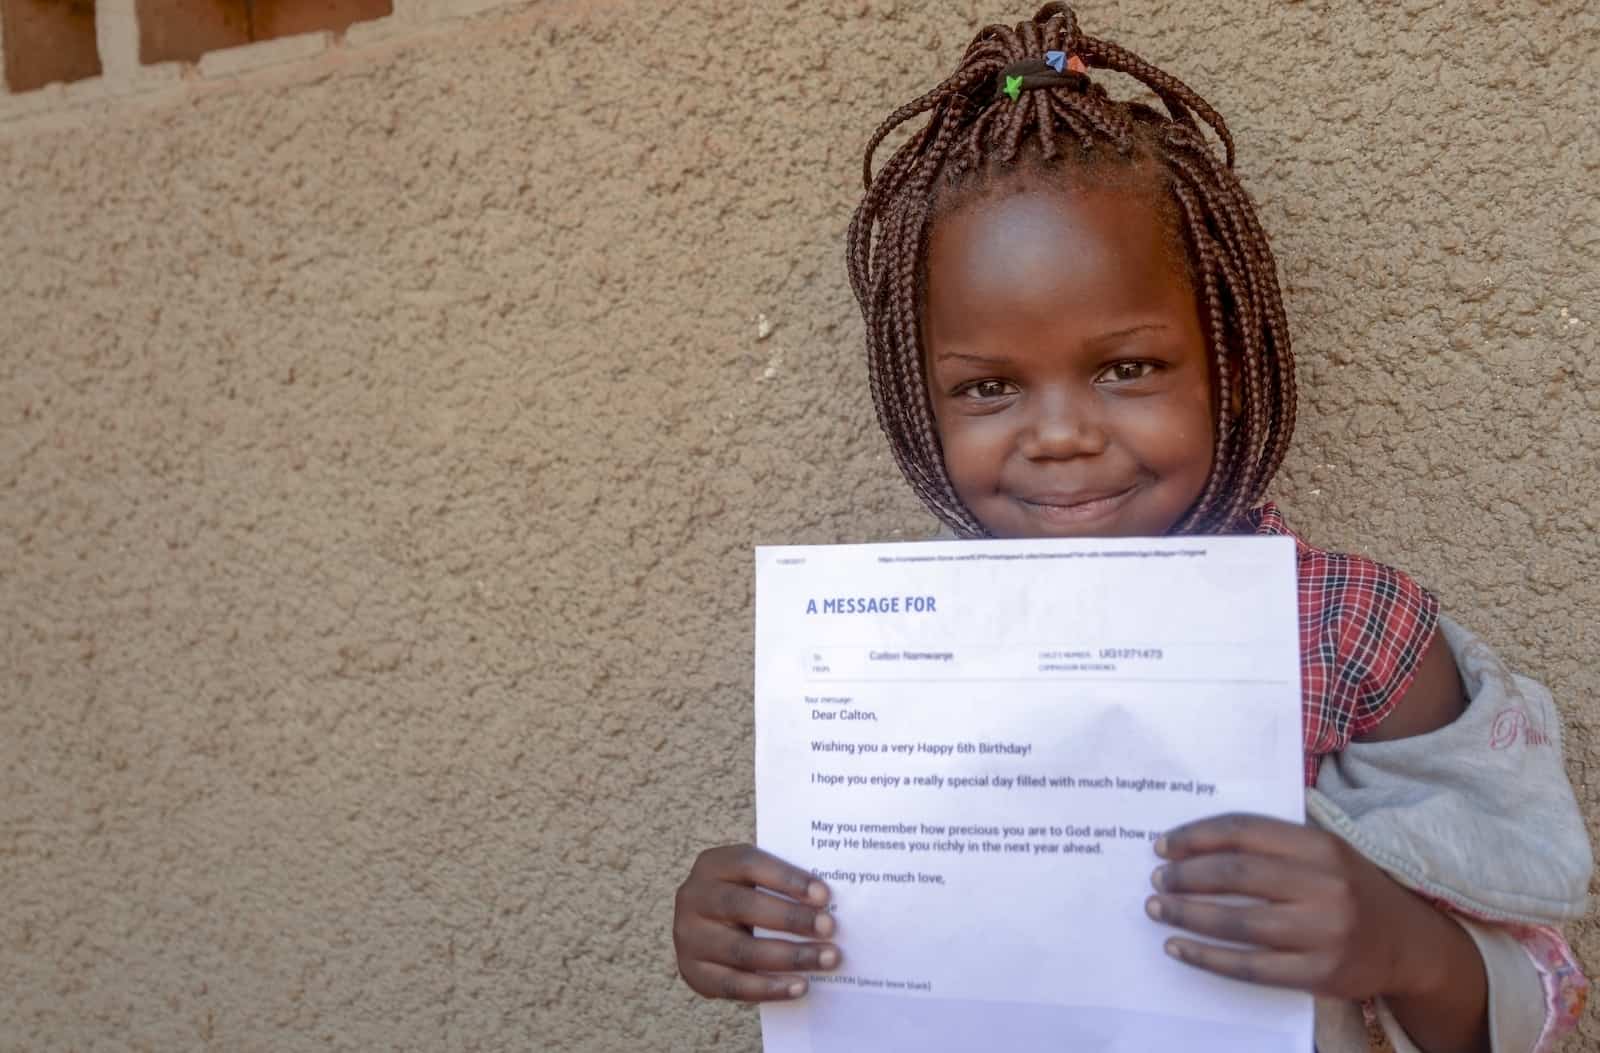 A young girl from Uganda with her hair in braids and a checkered shirt holds a letter in front of her and smiles.